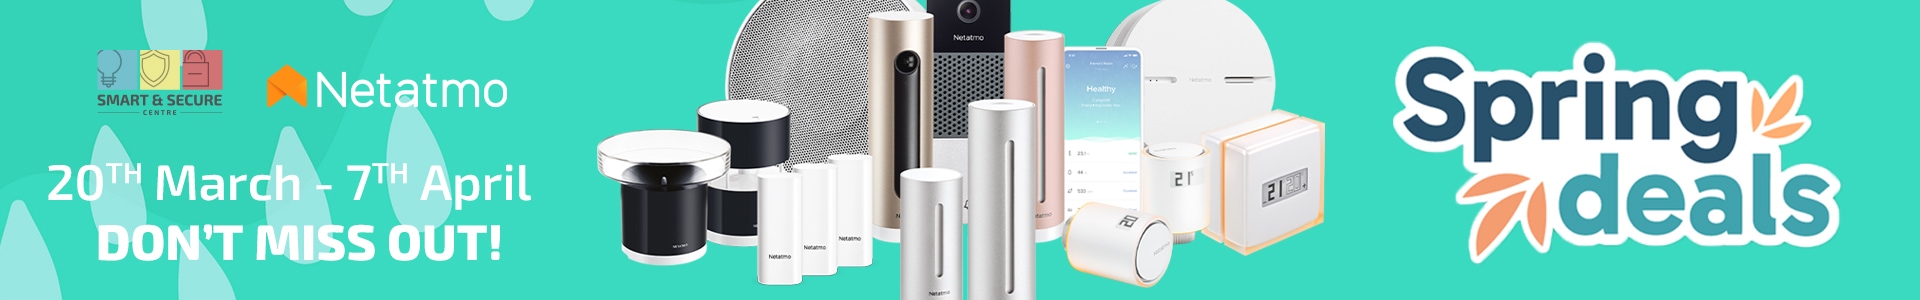 Netatmo Spring Deals - 20th March to 7th April 2024 - Don't miss out!